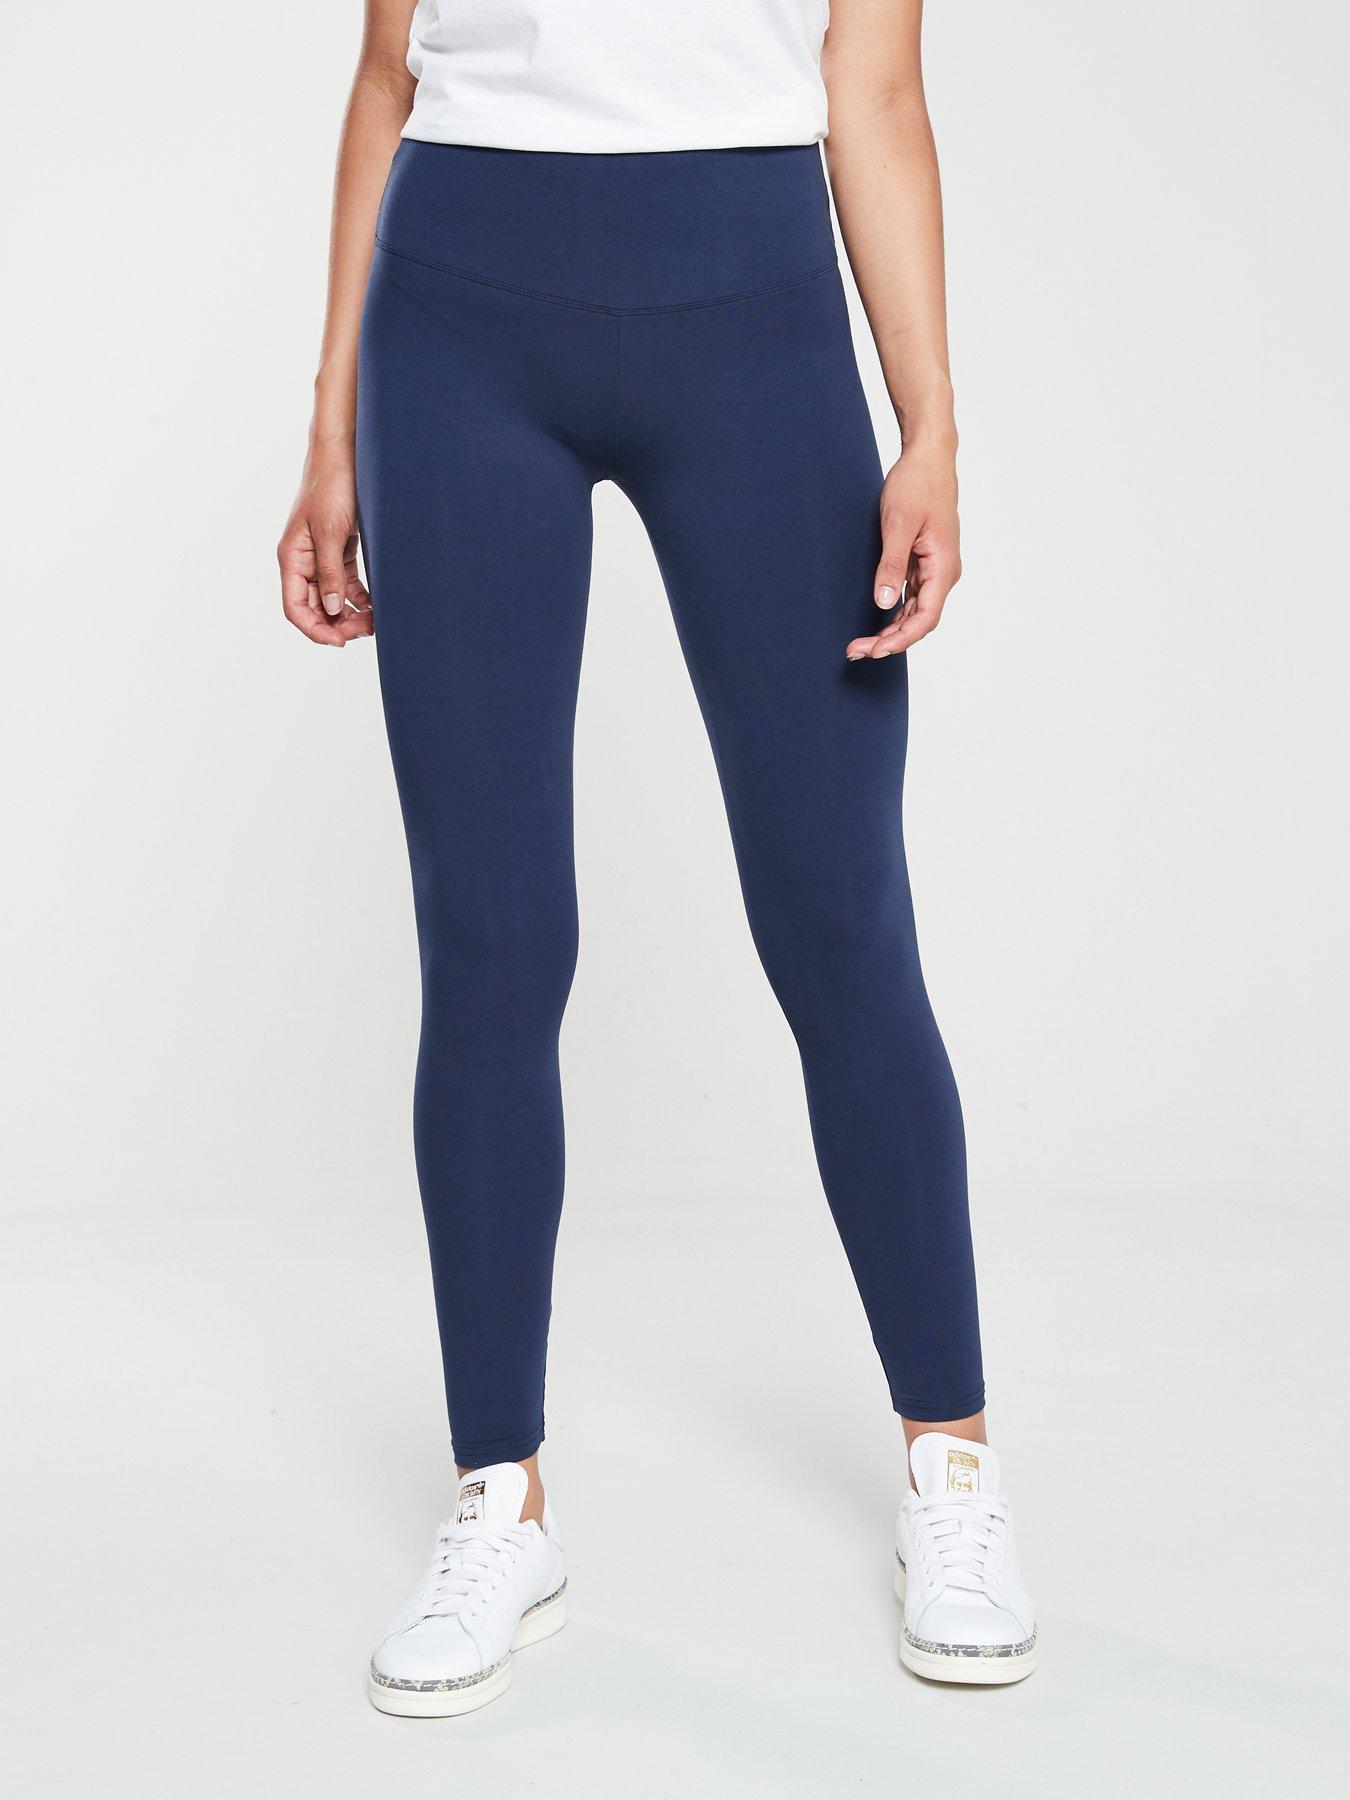 s 'no muffin top' £10 leggings hide lumps and bumps so